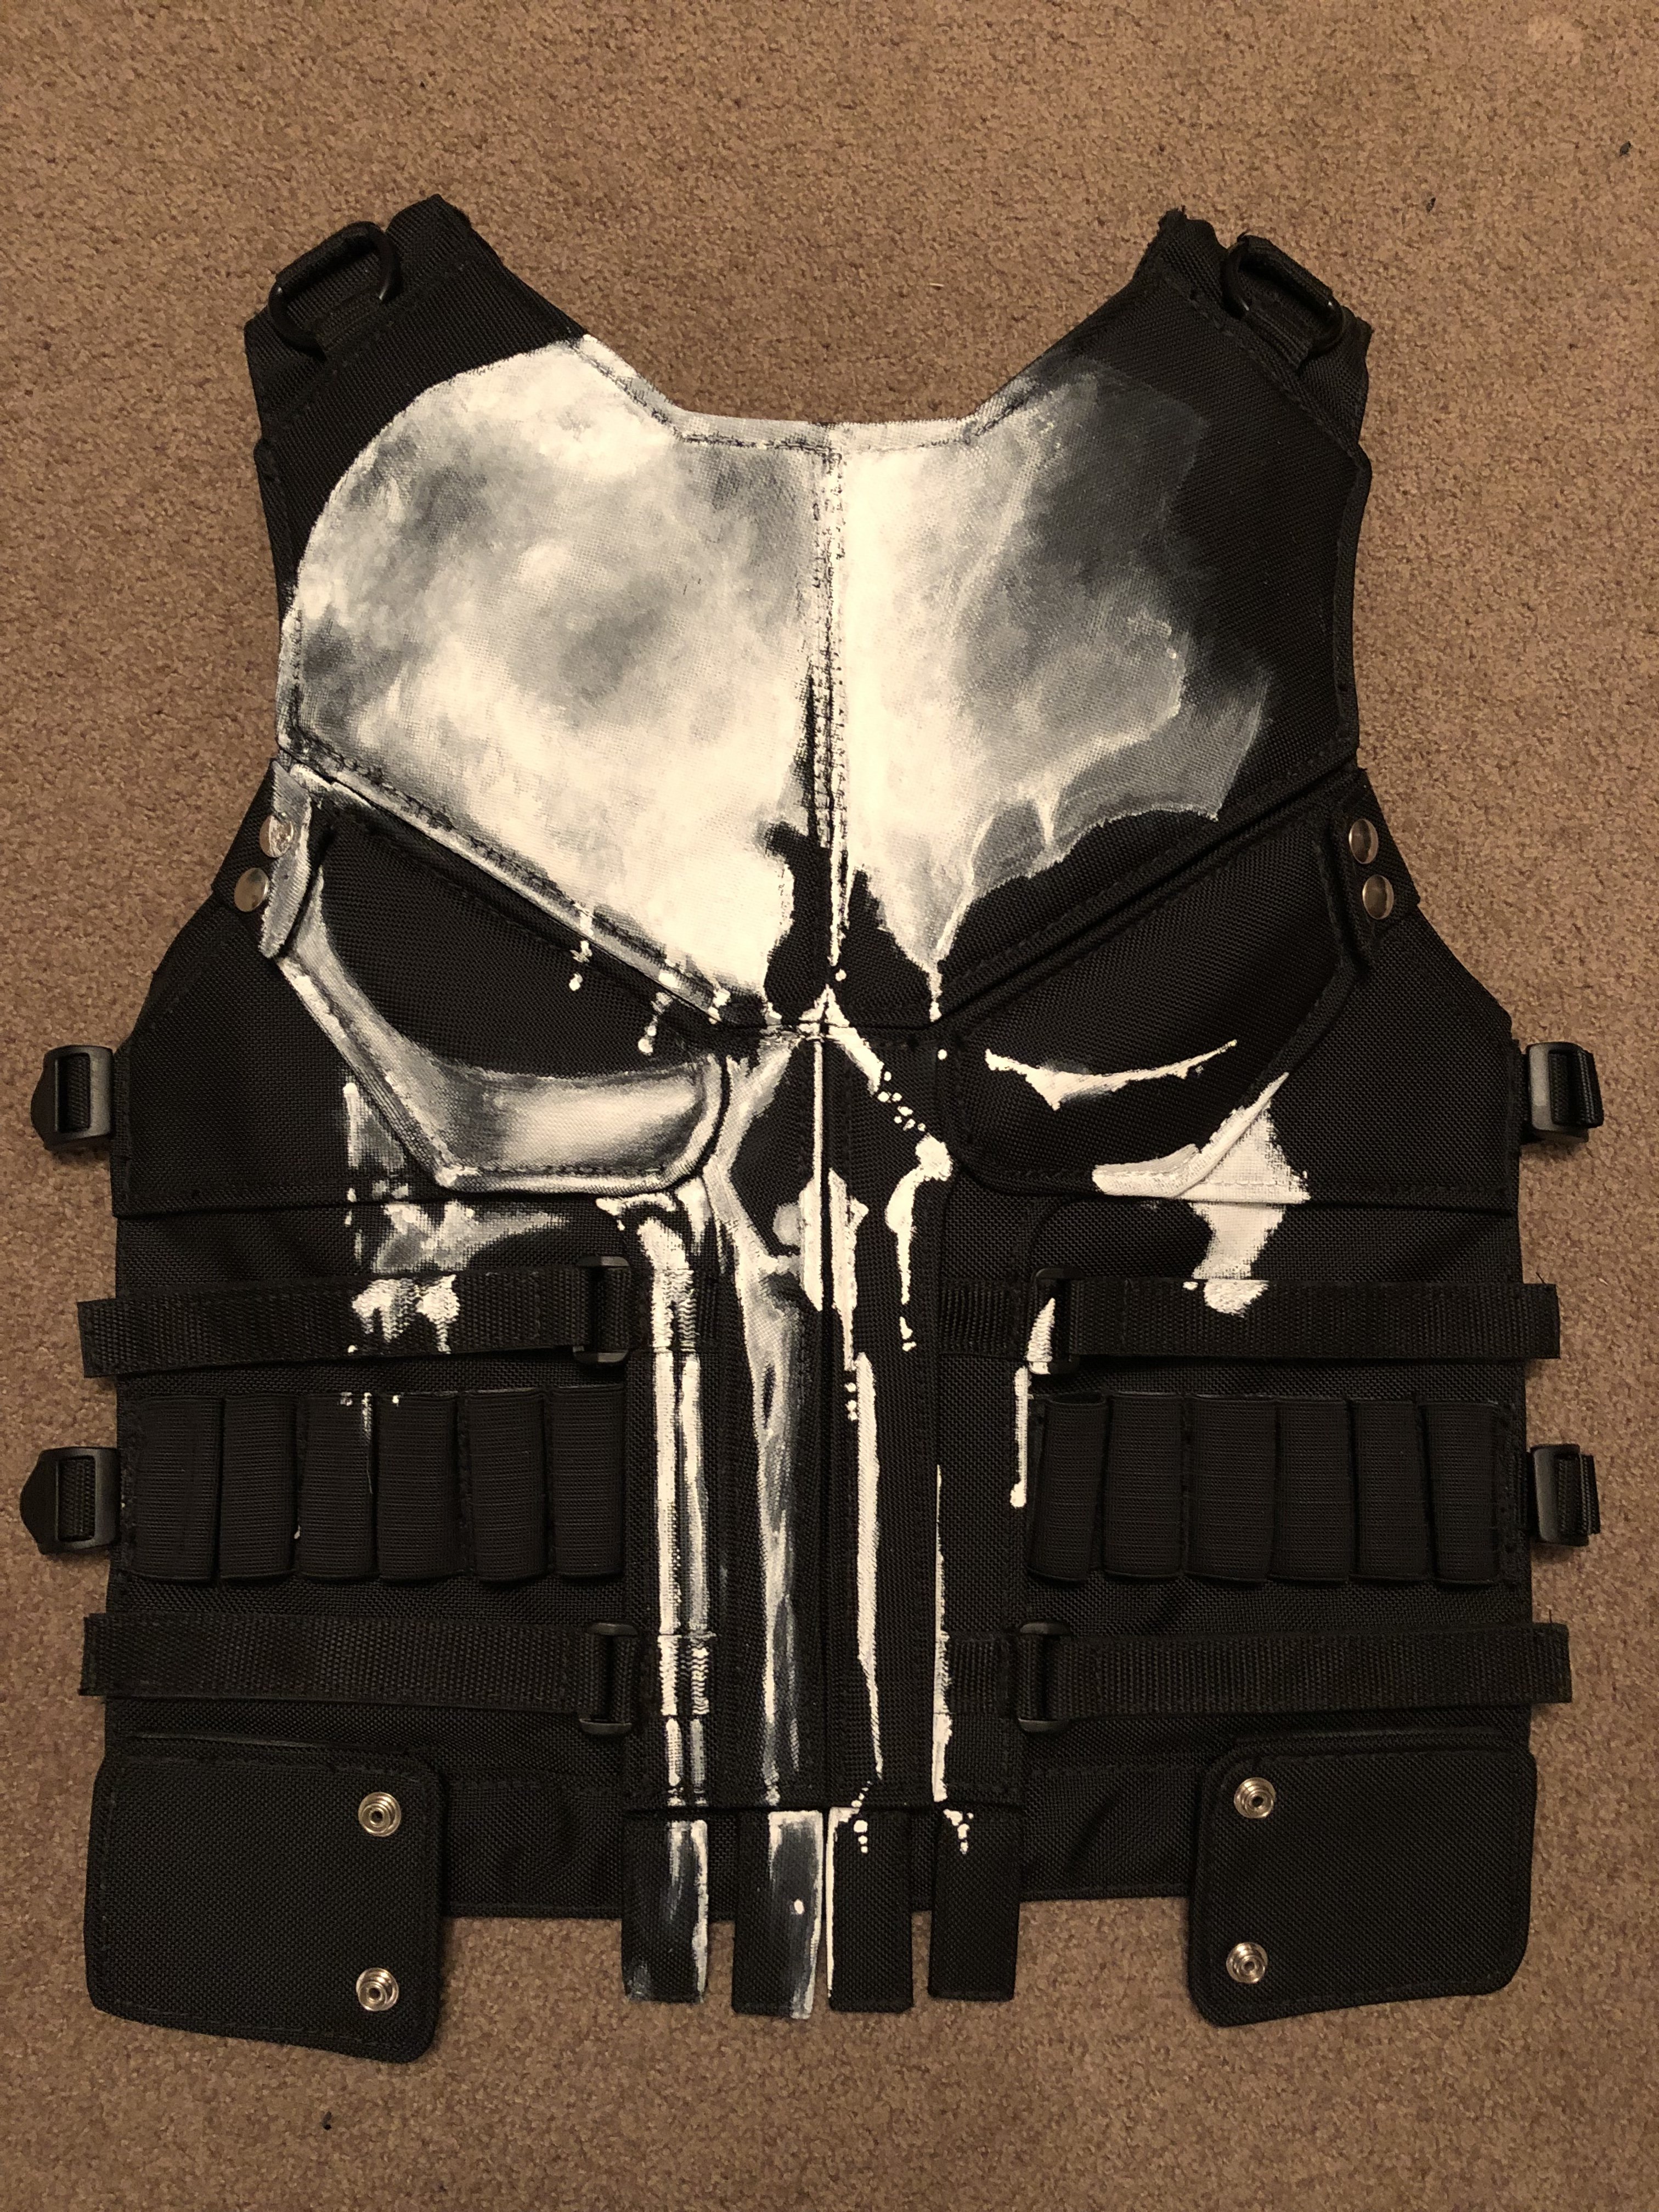 Punisher Vest Replica [FINISHED] & outfit Season 2 Netflix | RPF Costume  and Prop Maker Community